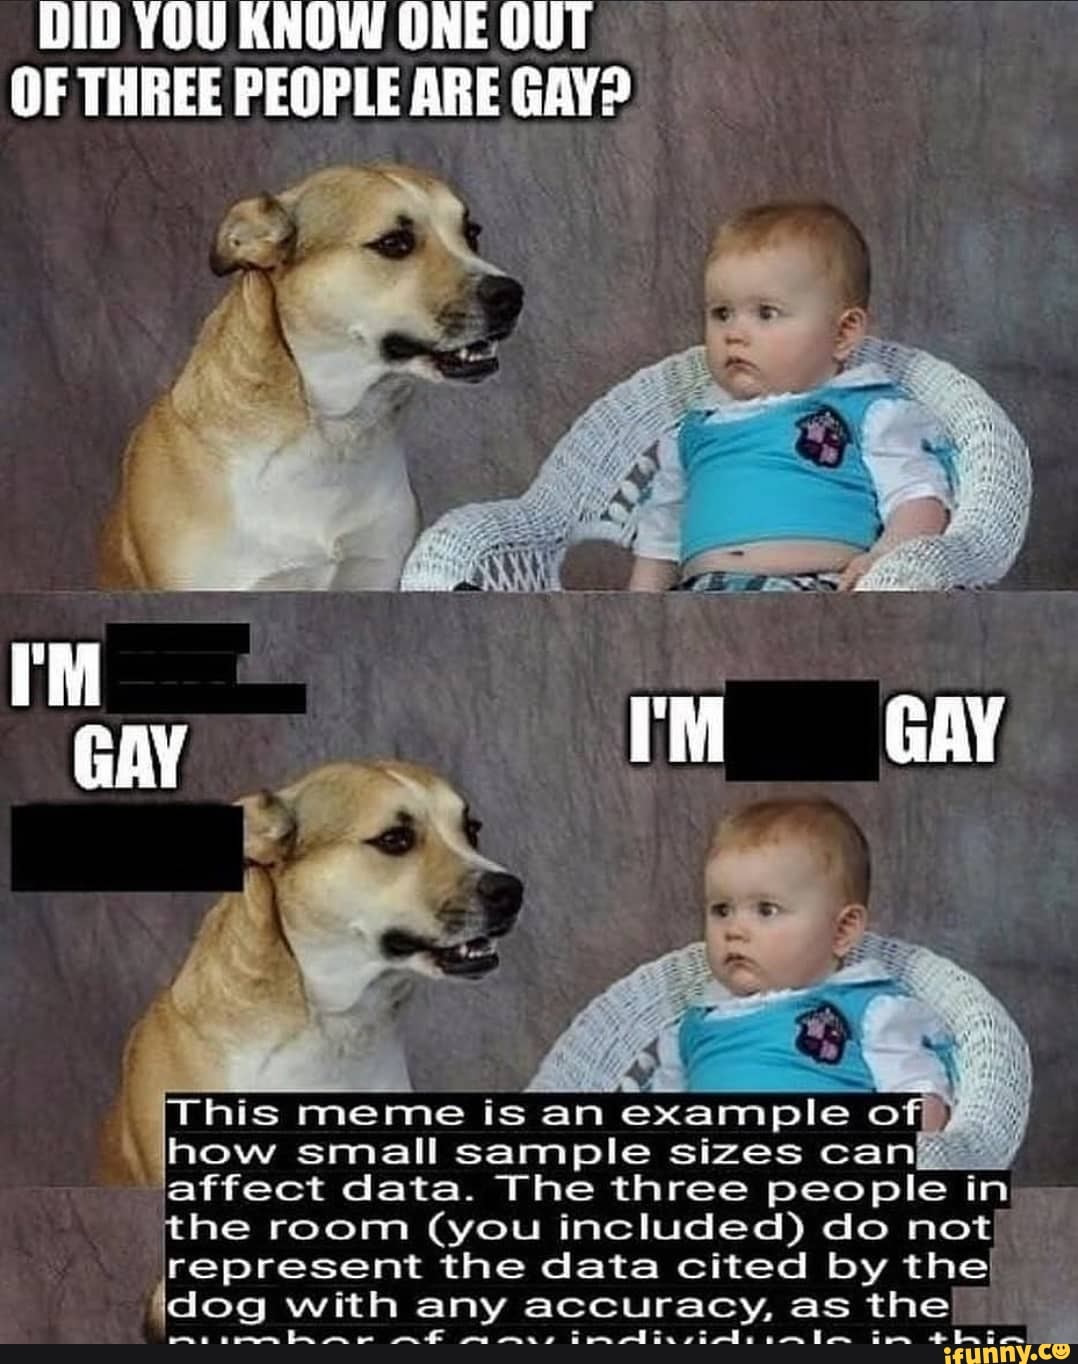 3 out 3 people are gay meme